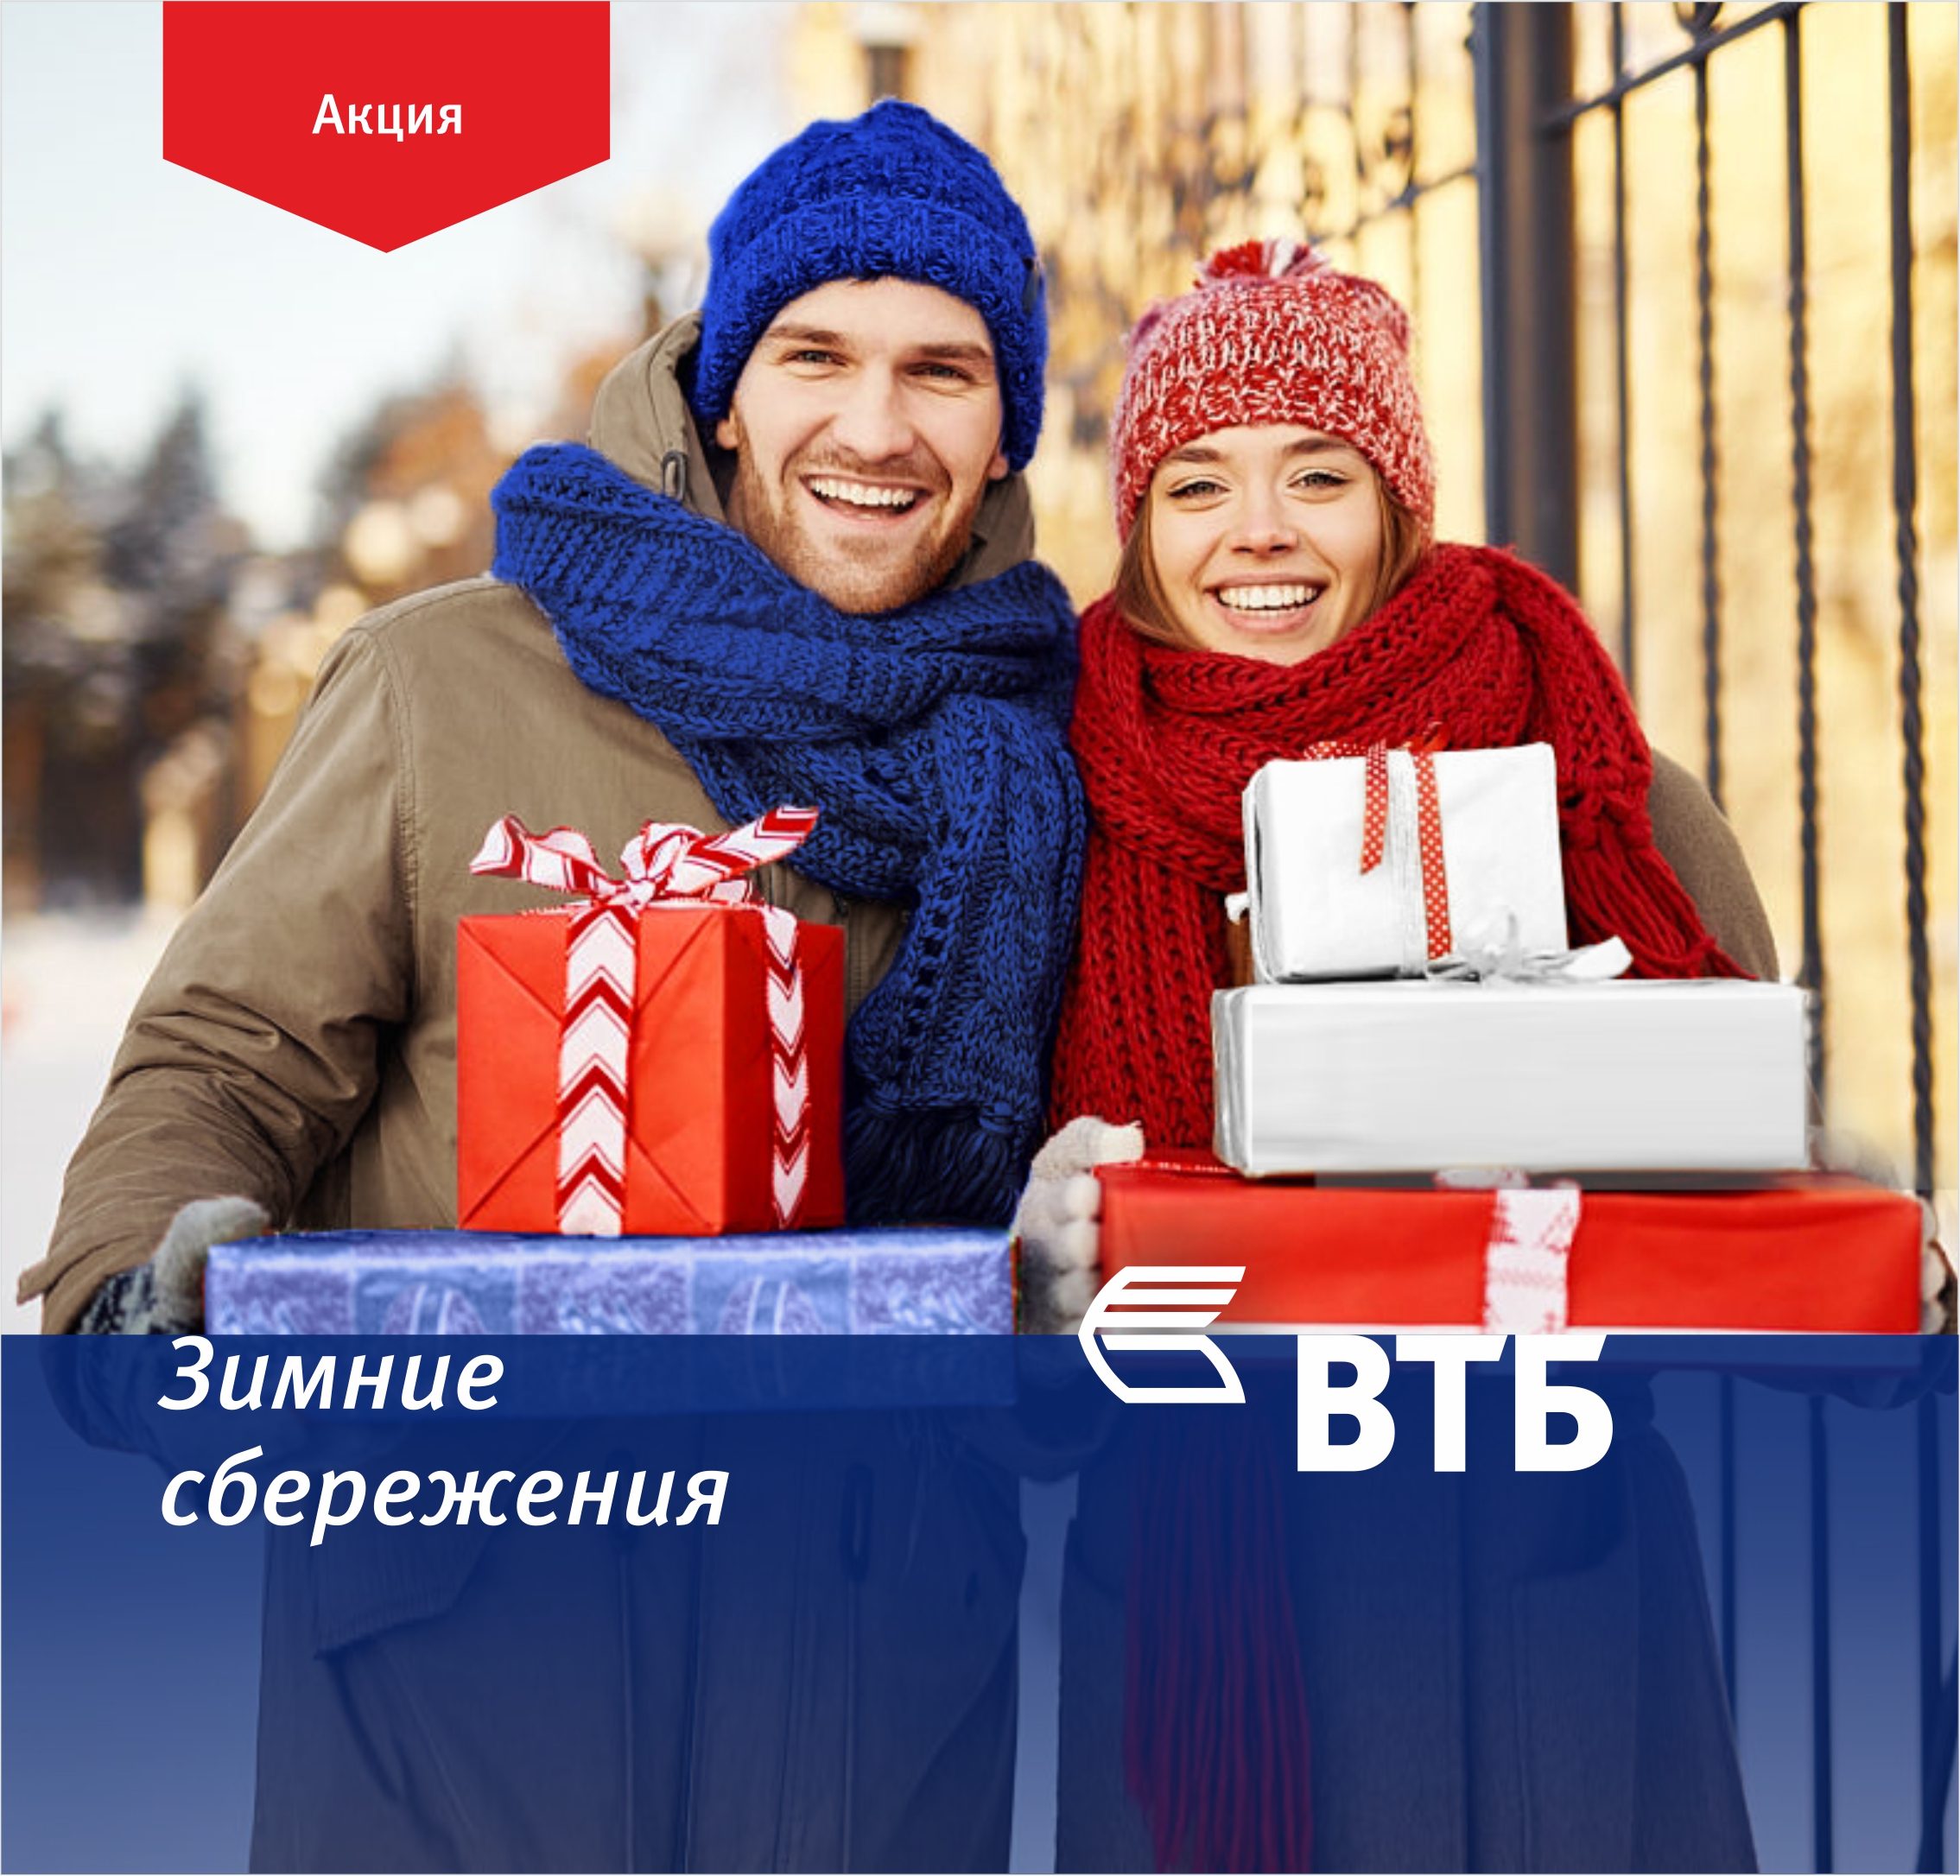 VTB Bank (Armenia) launched a campaign "Winter Savings" on deposits  with high rates